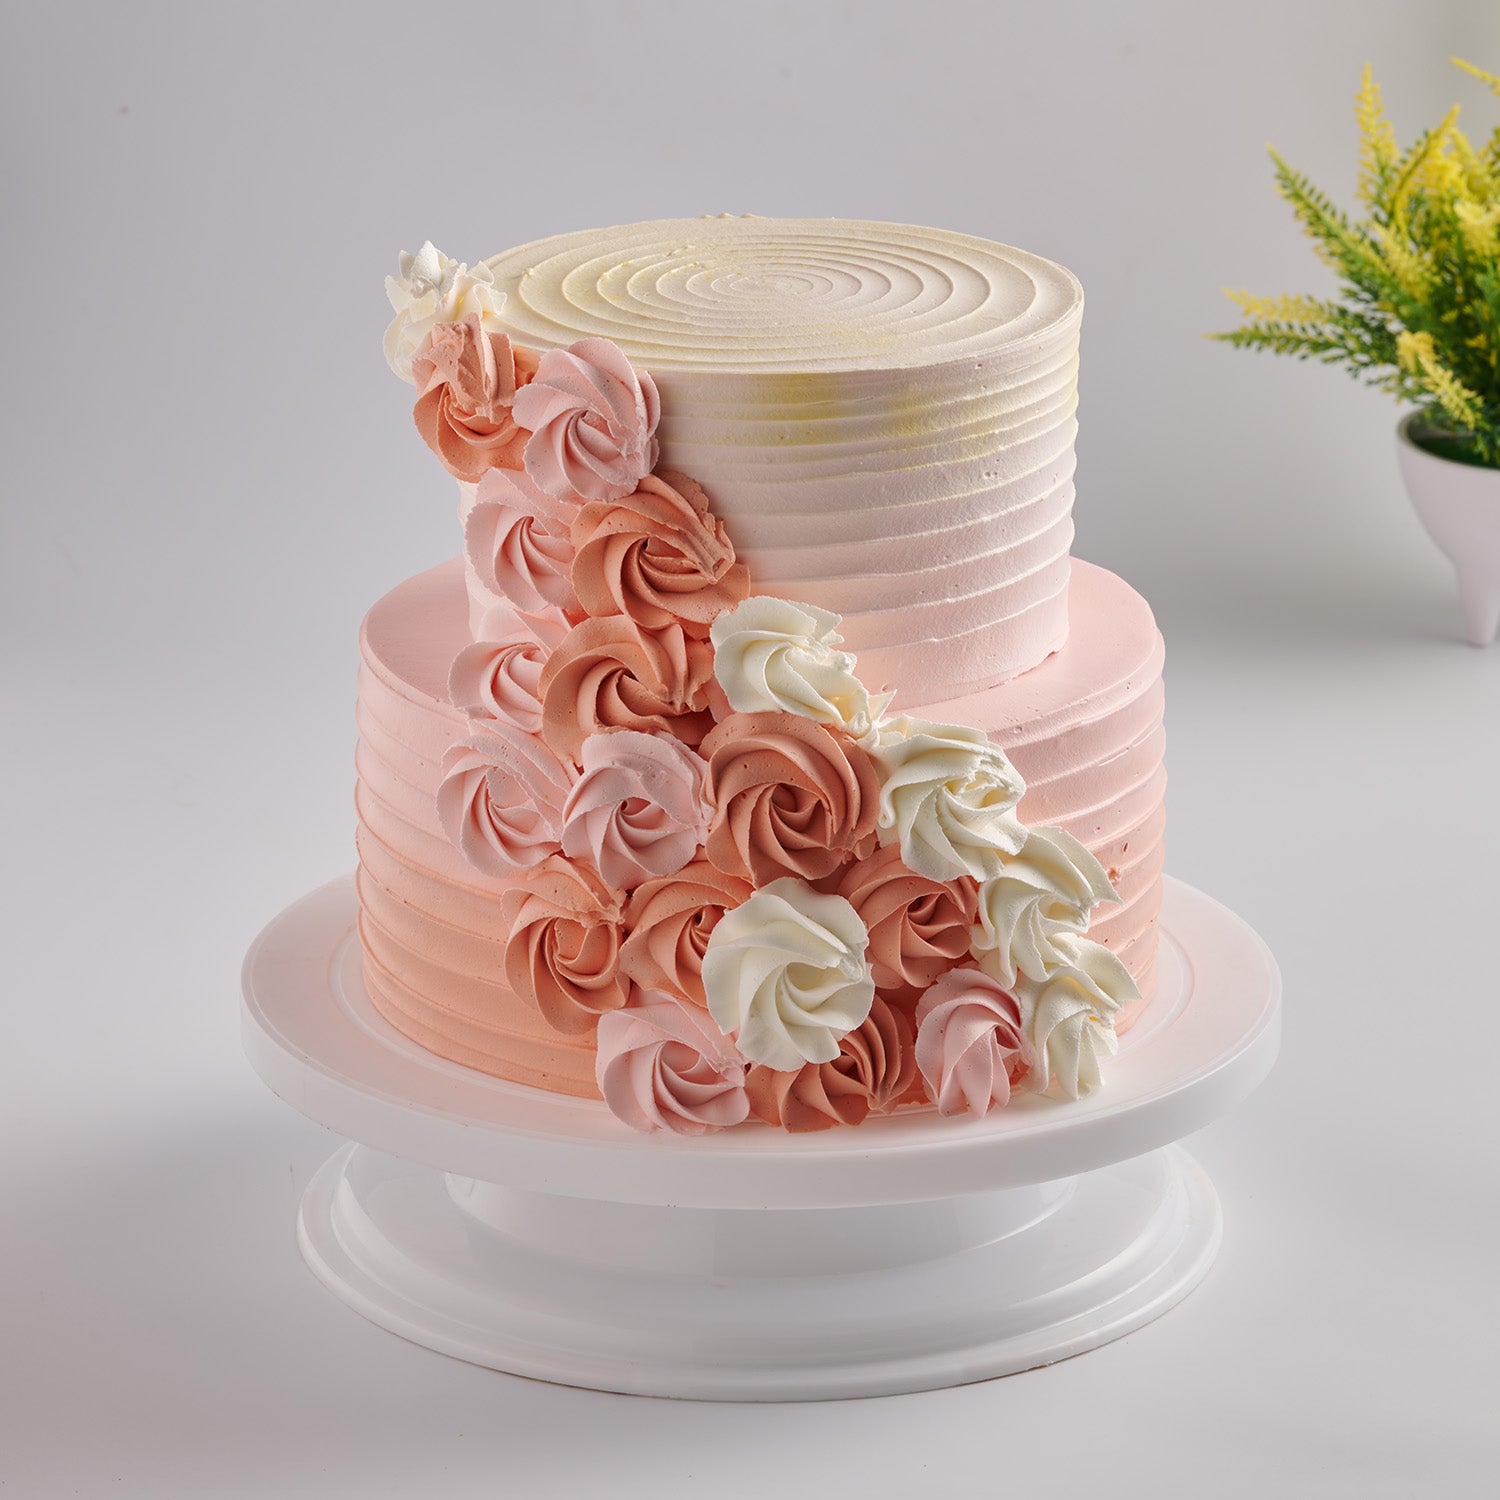 What is the best wedding cake size for 50 guests in Canada?